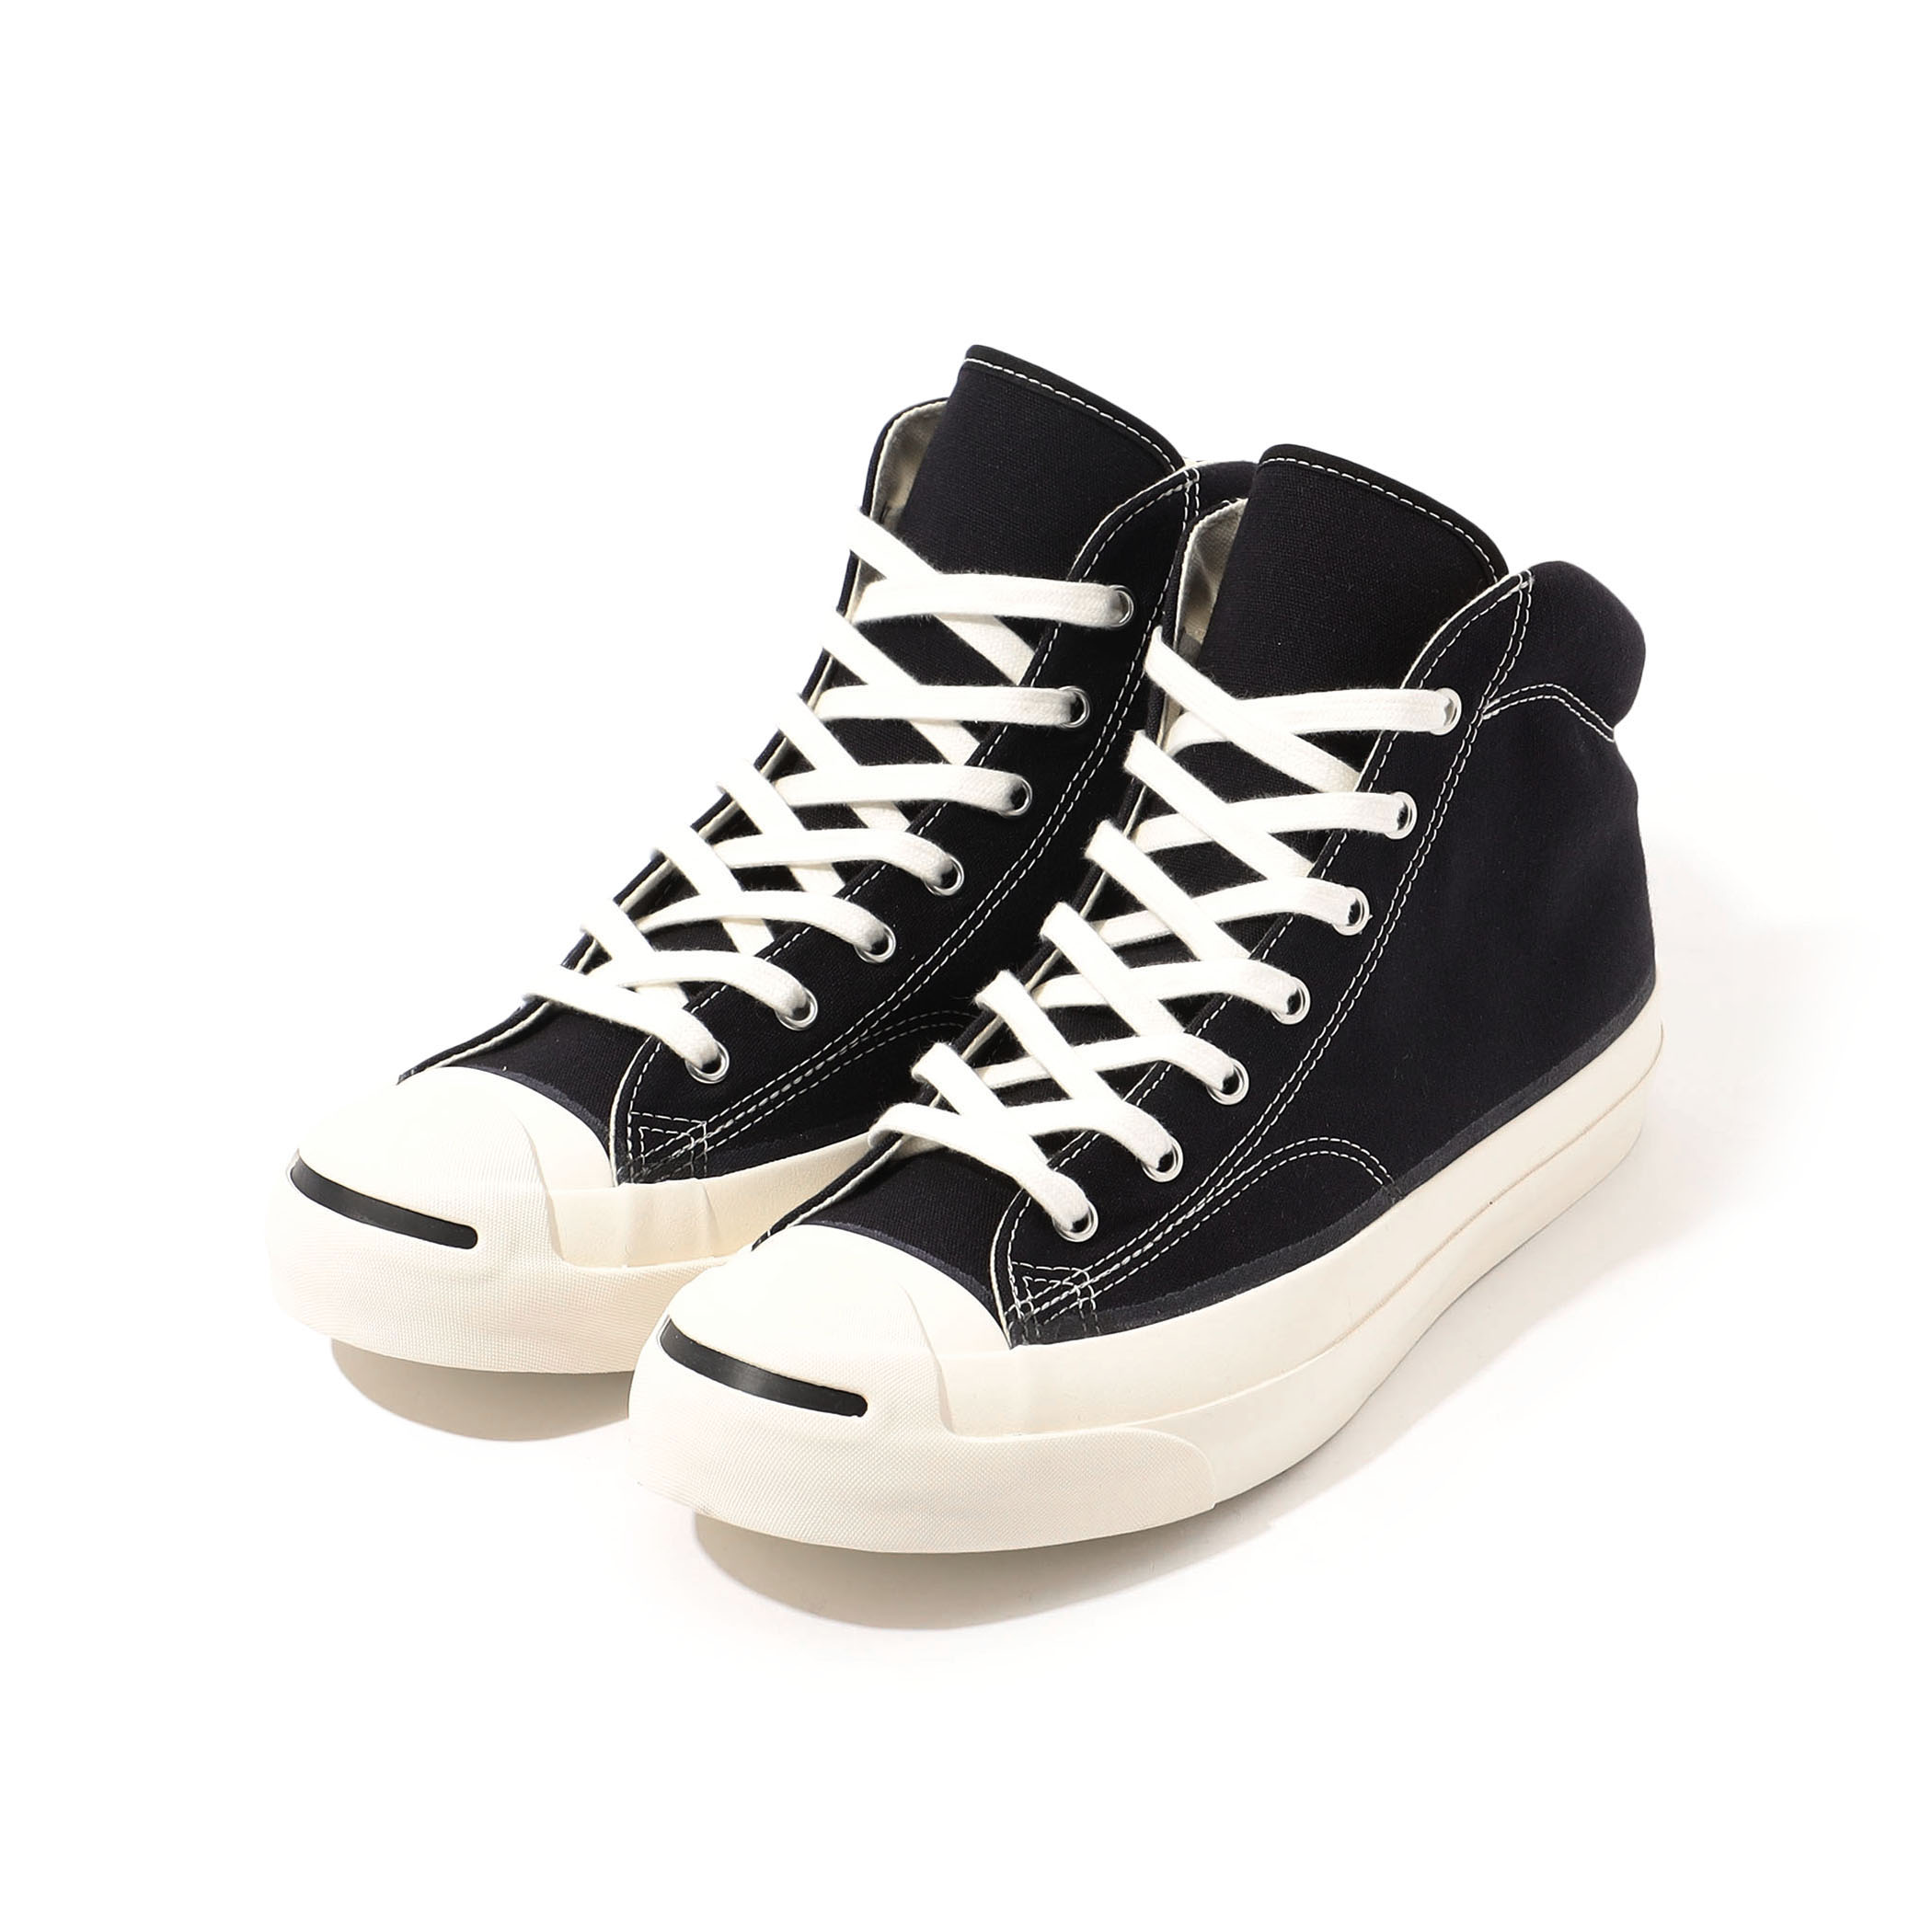 CONVERSE ADDICT JACK PURCELL MID